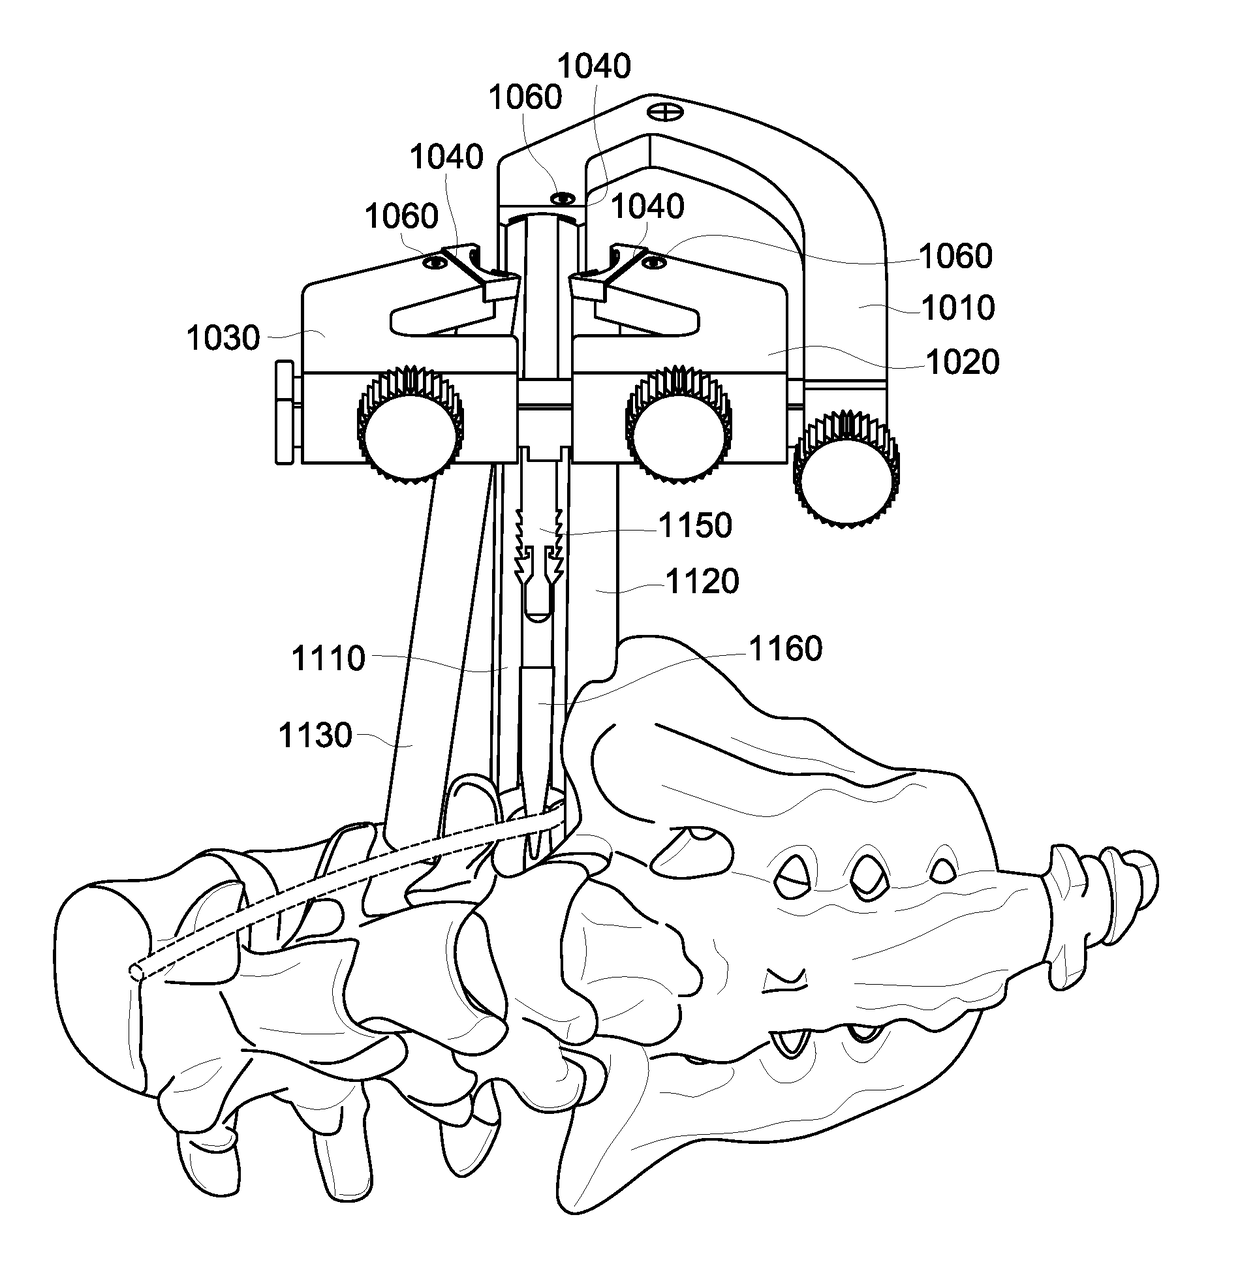 System for Approaching the Spine Laterally and Retracting Tissue in an Anterior to Posterior Direction